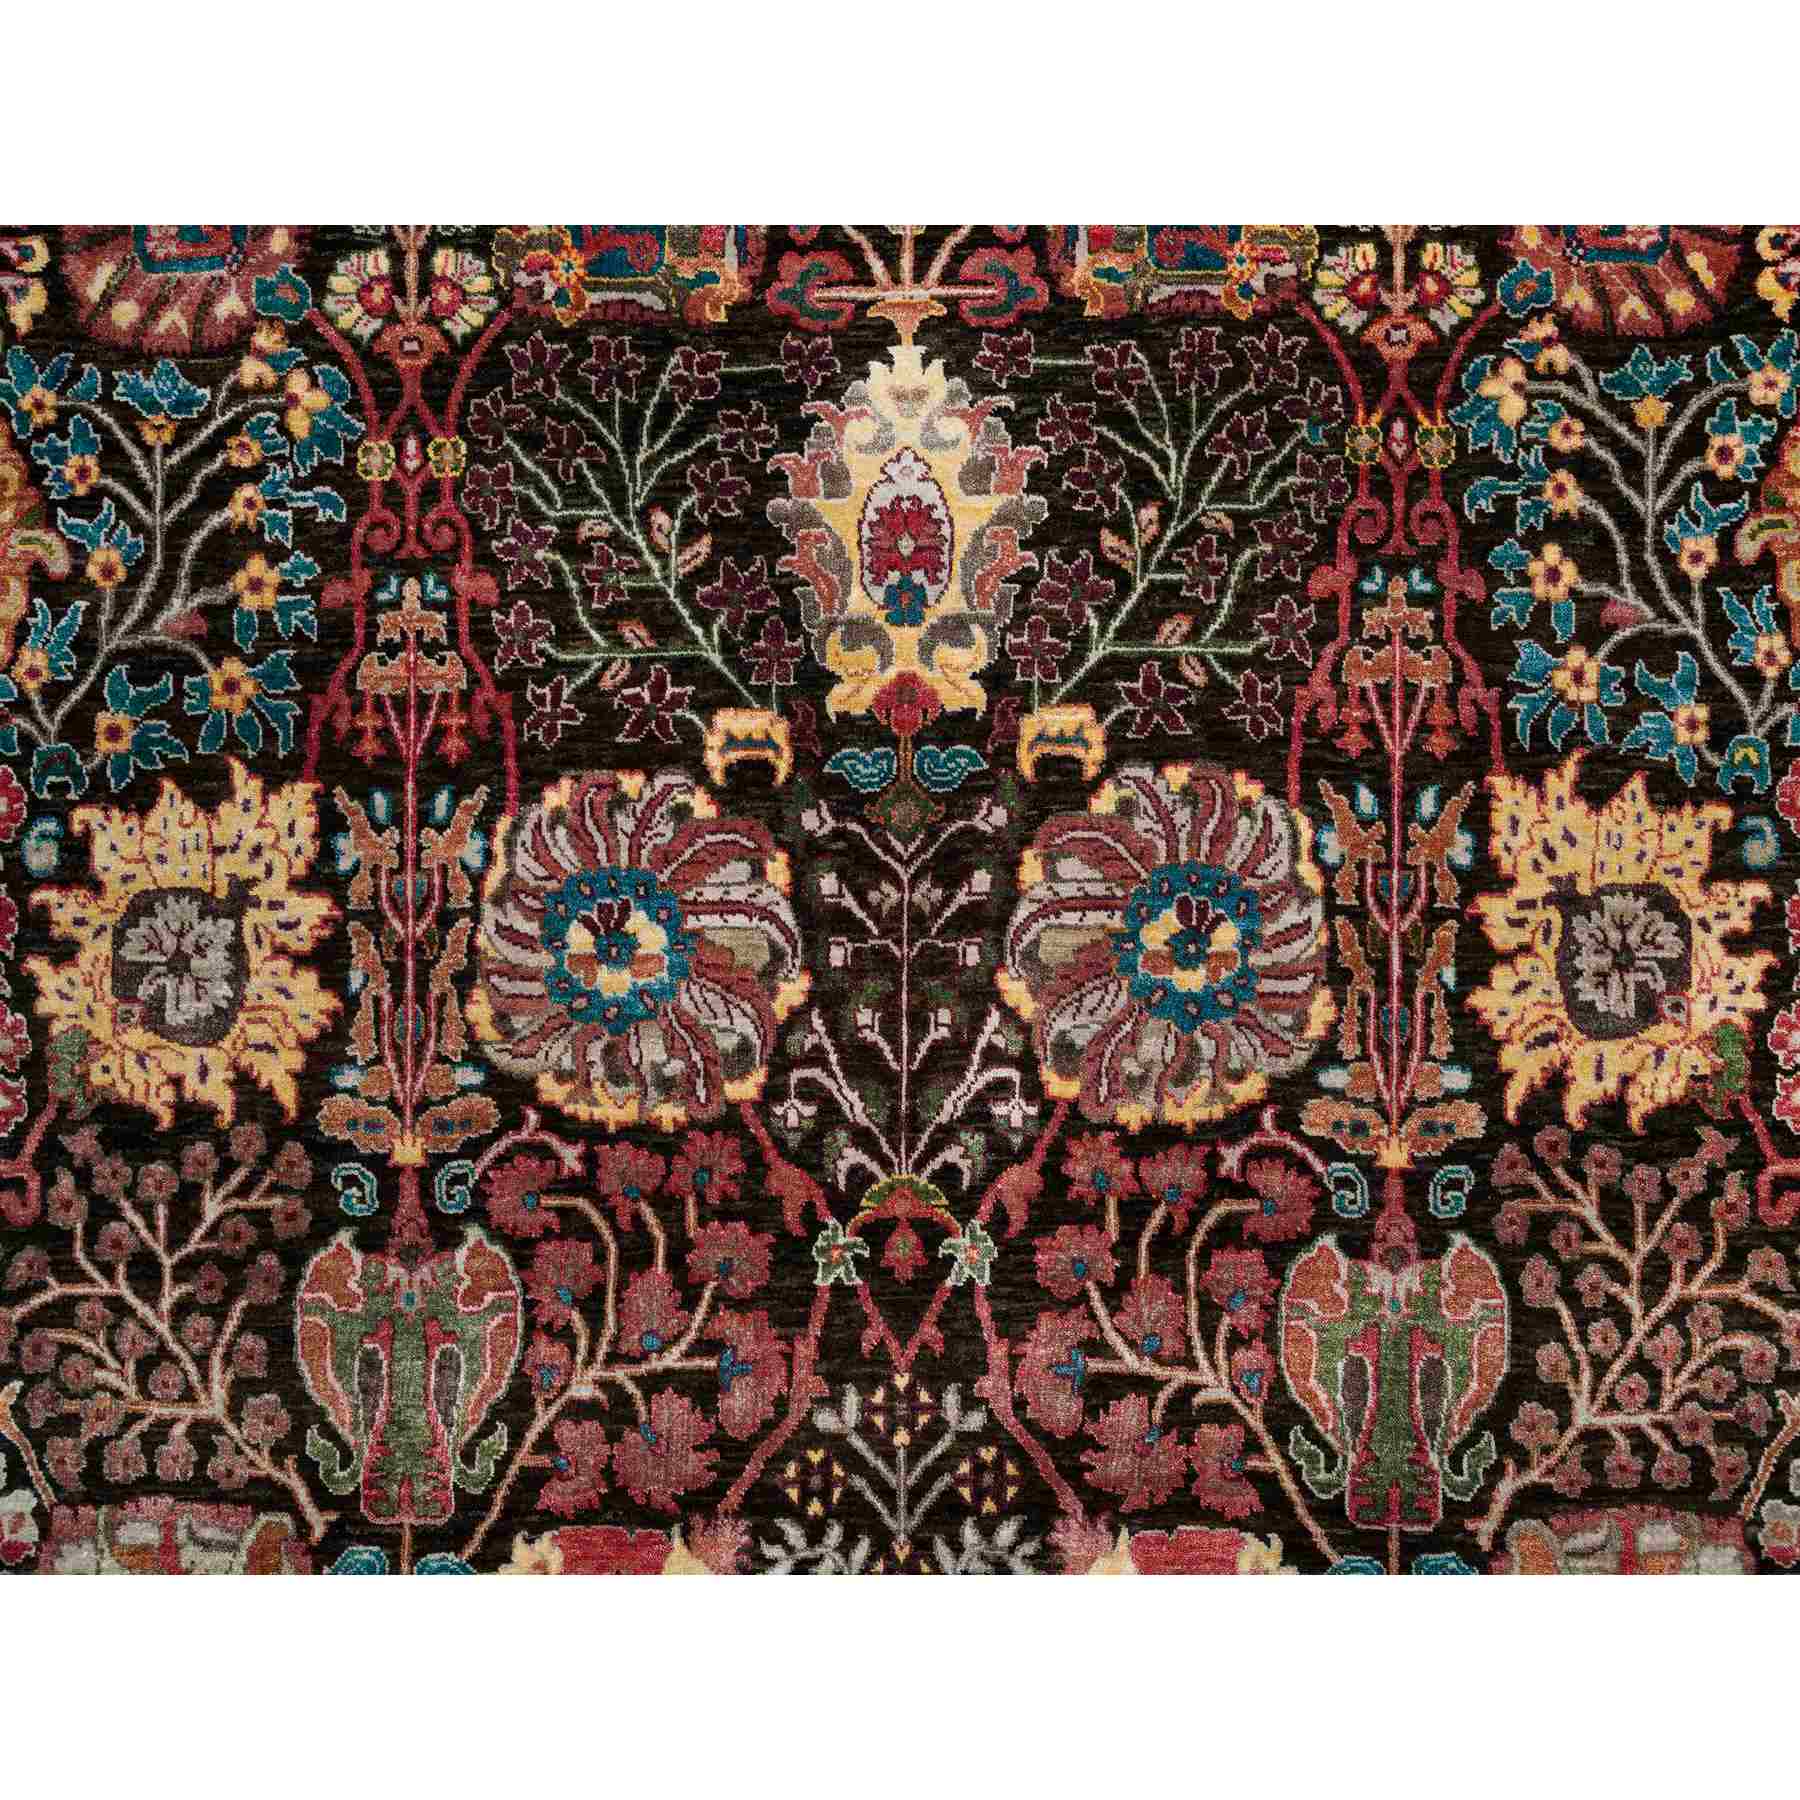 Wool-and-Silk-Hand-Knotted-Rug-451115